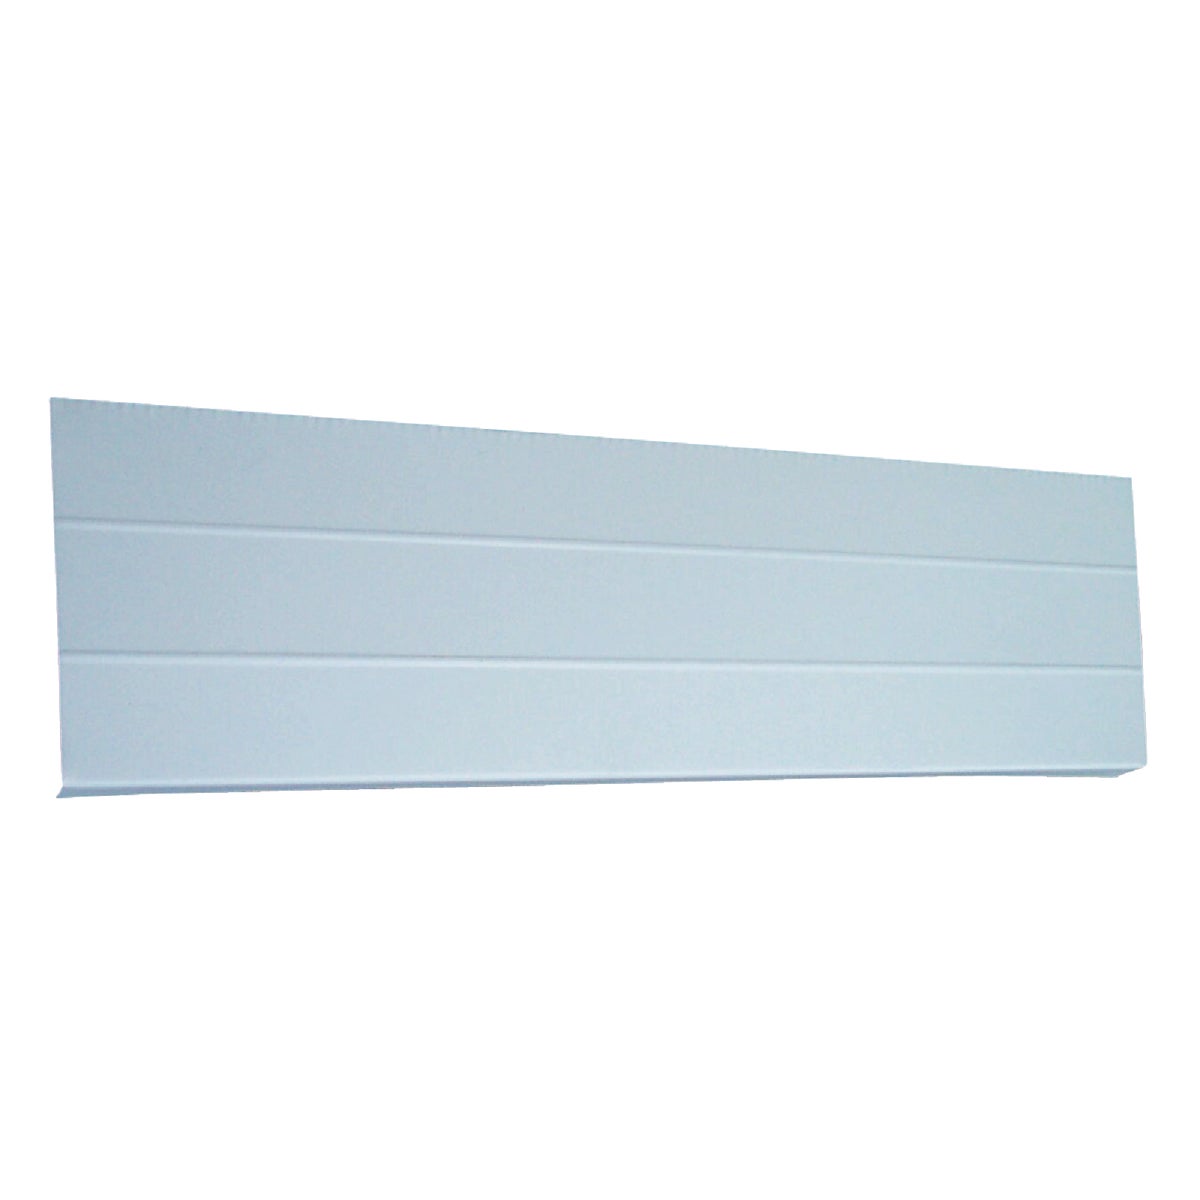 Item 116602, Fascia trim covers the all important wooden fascia boards from exposure to 